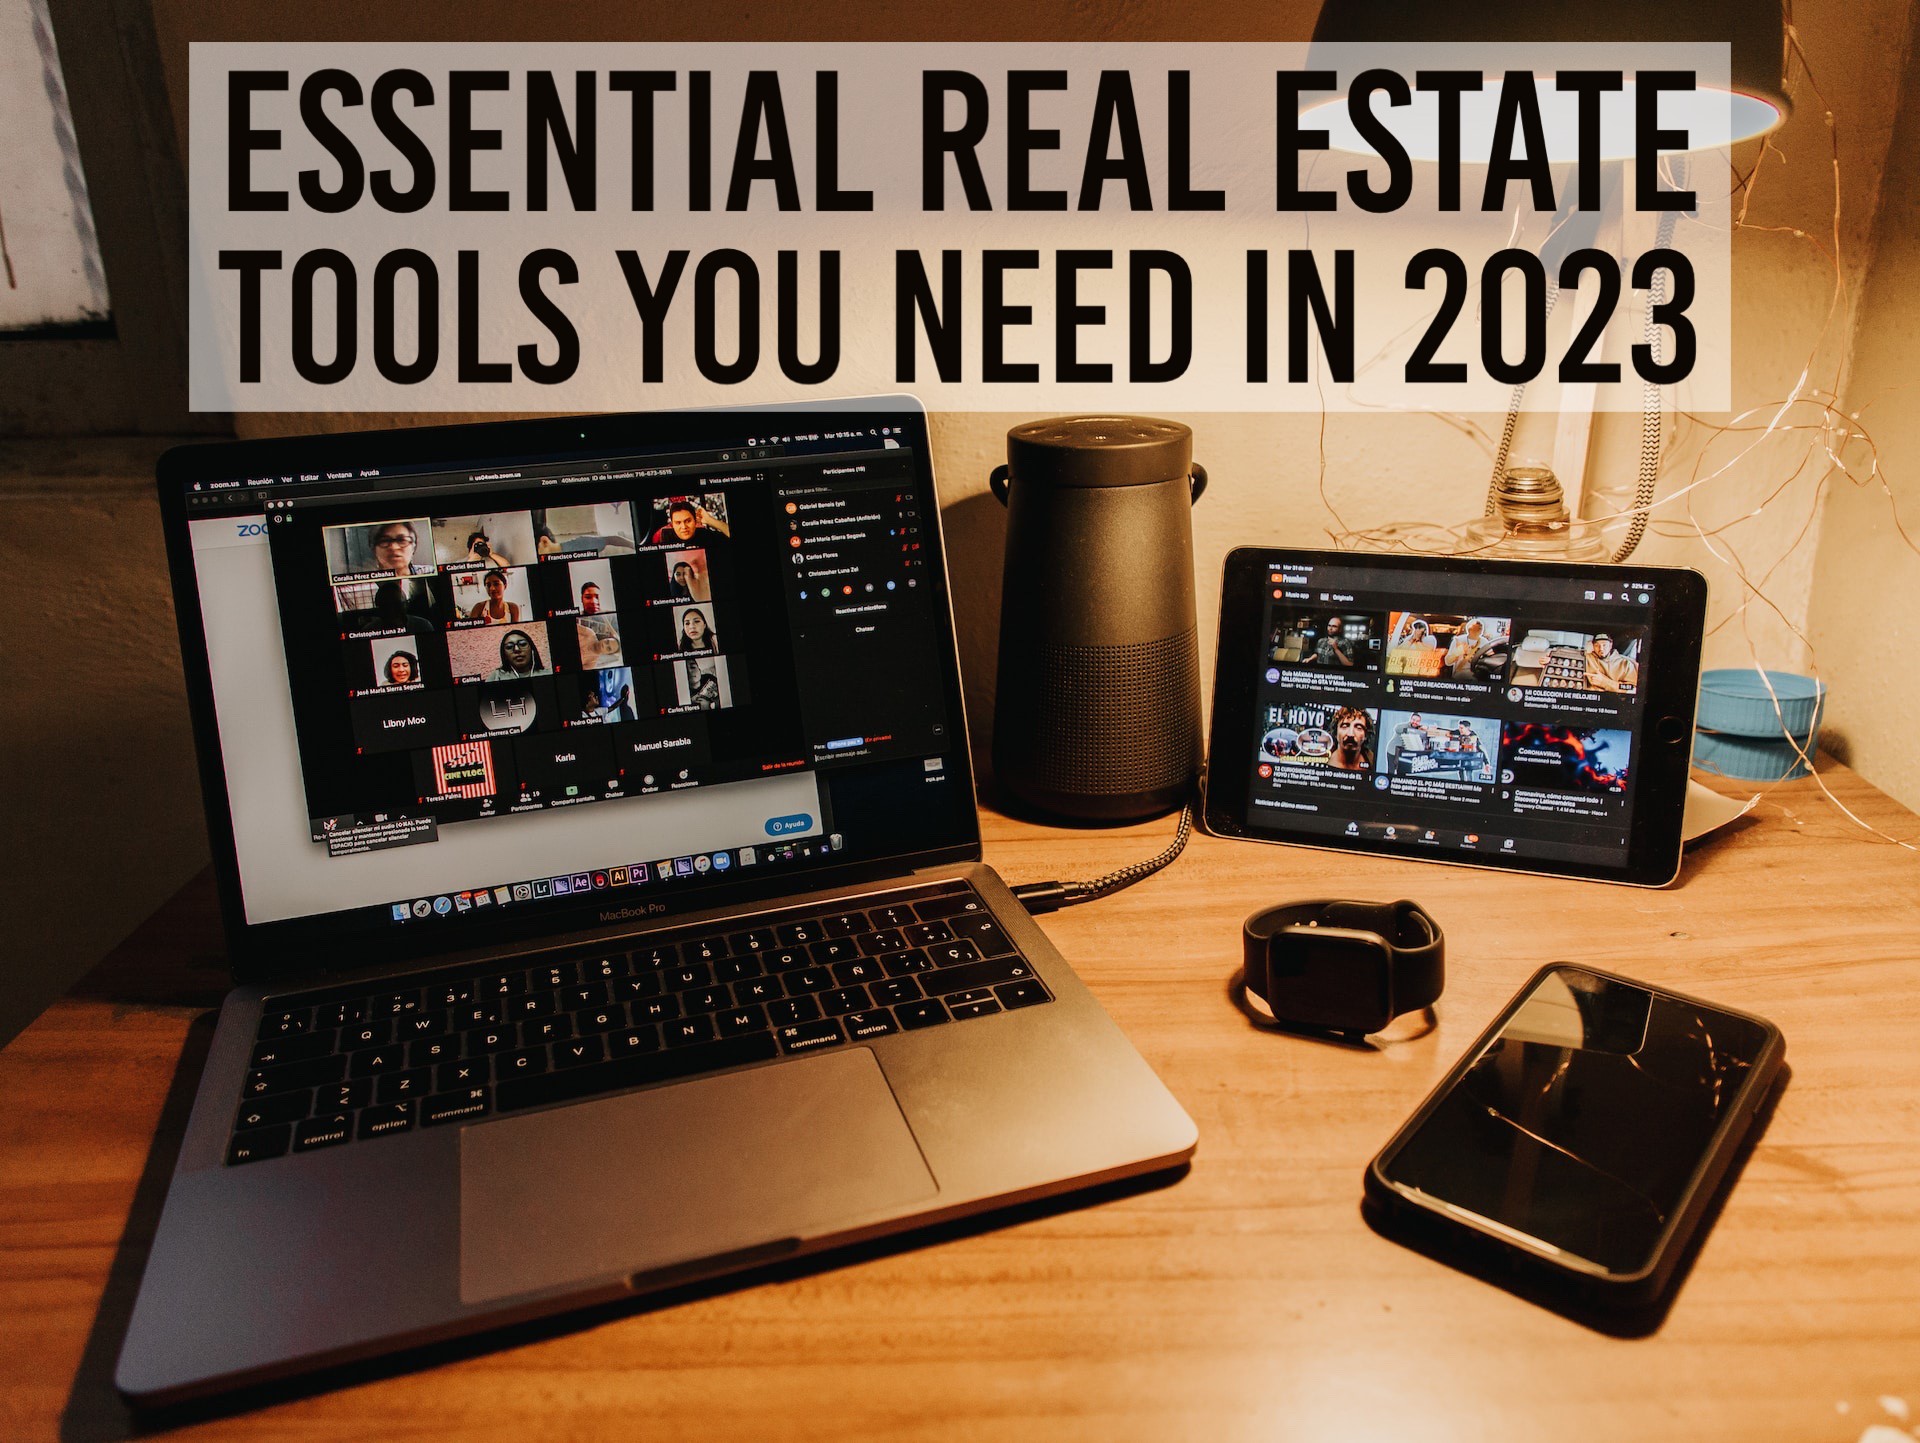 Using software for live virtual tours, one of the essential real estate tools you need.